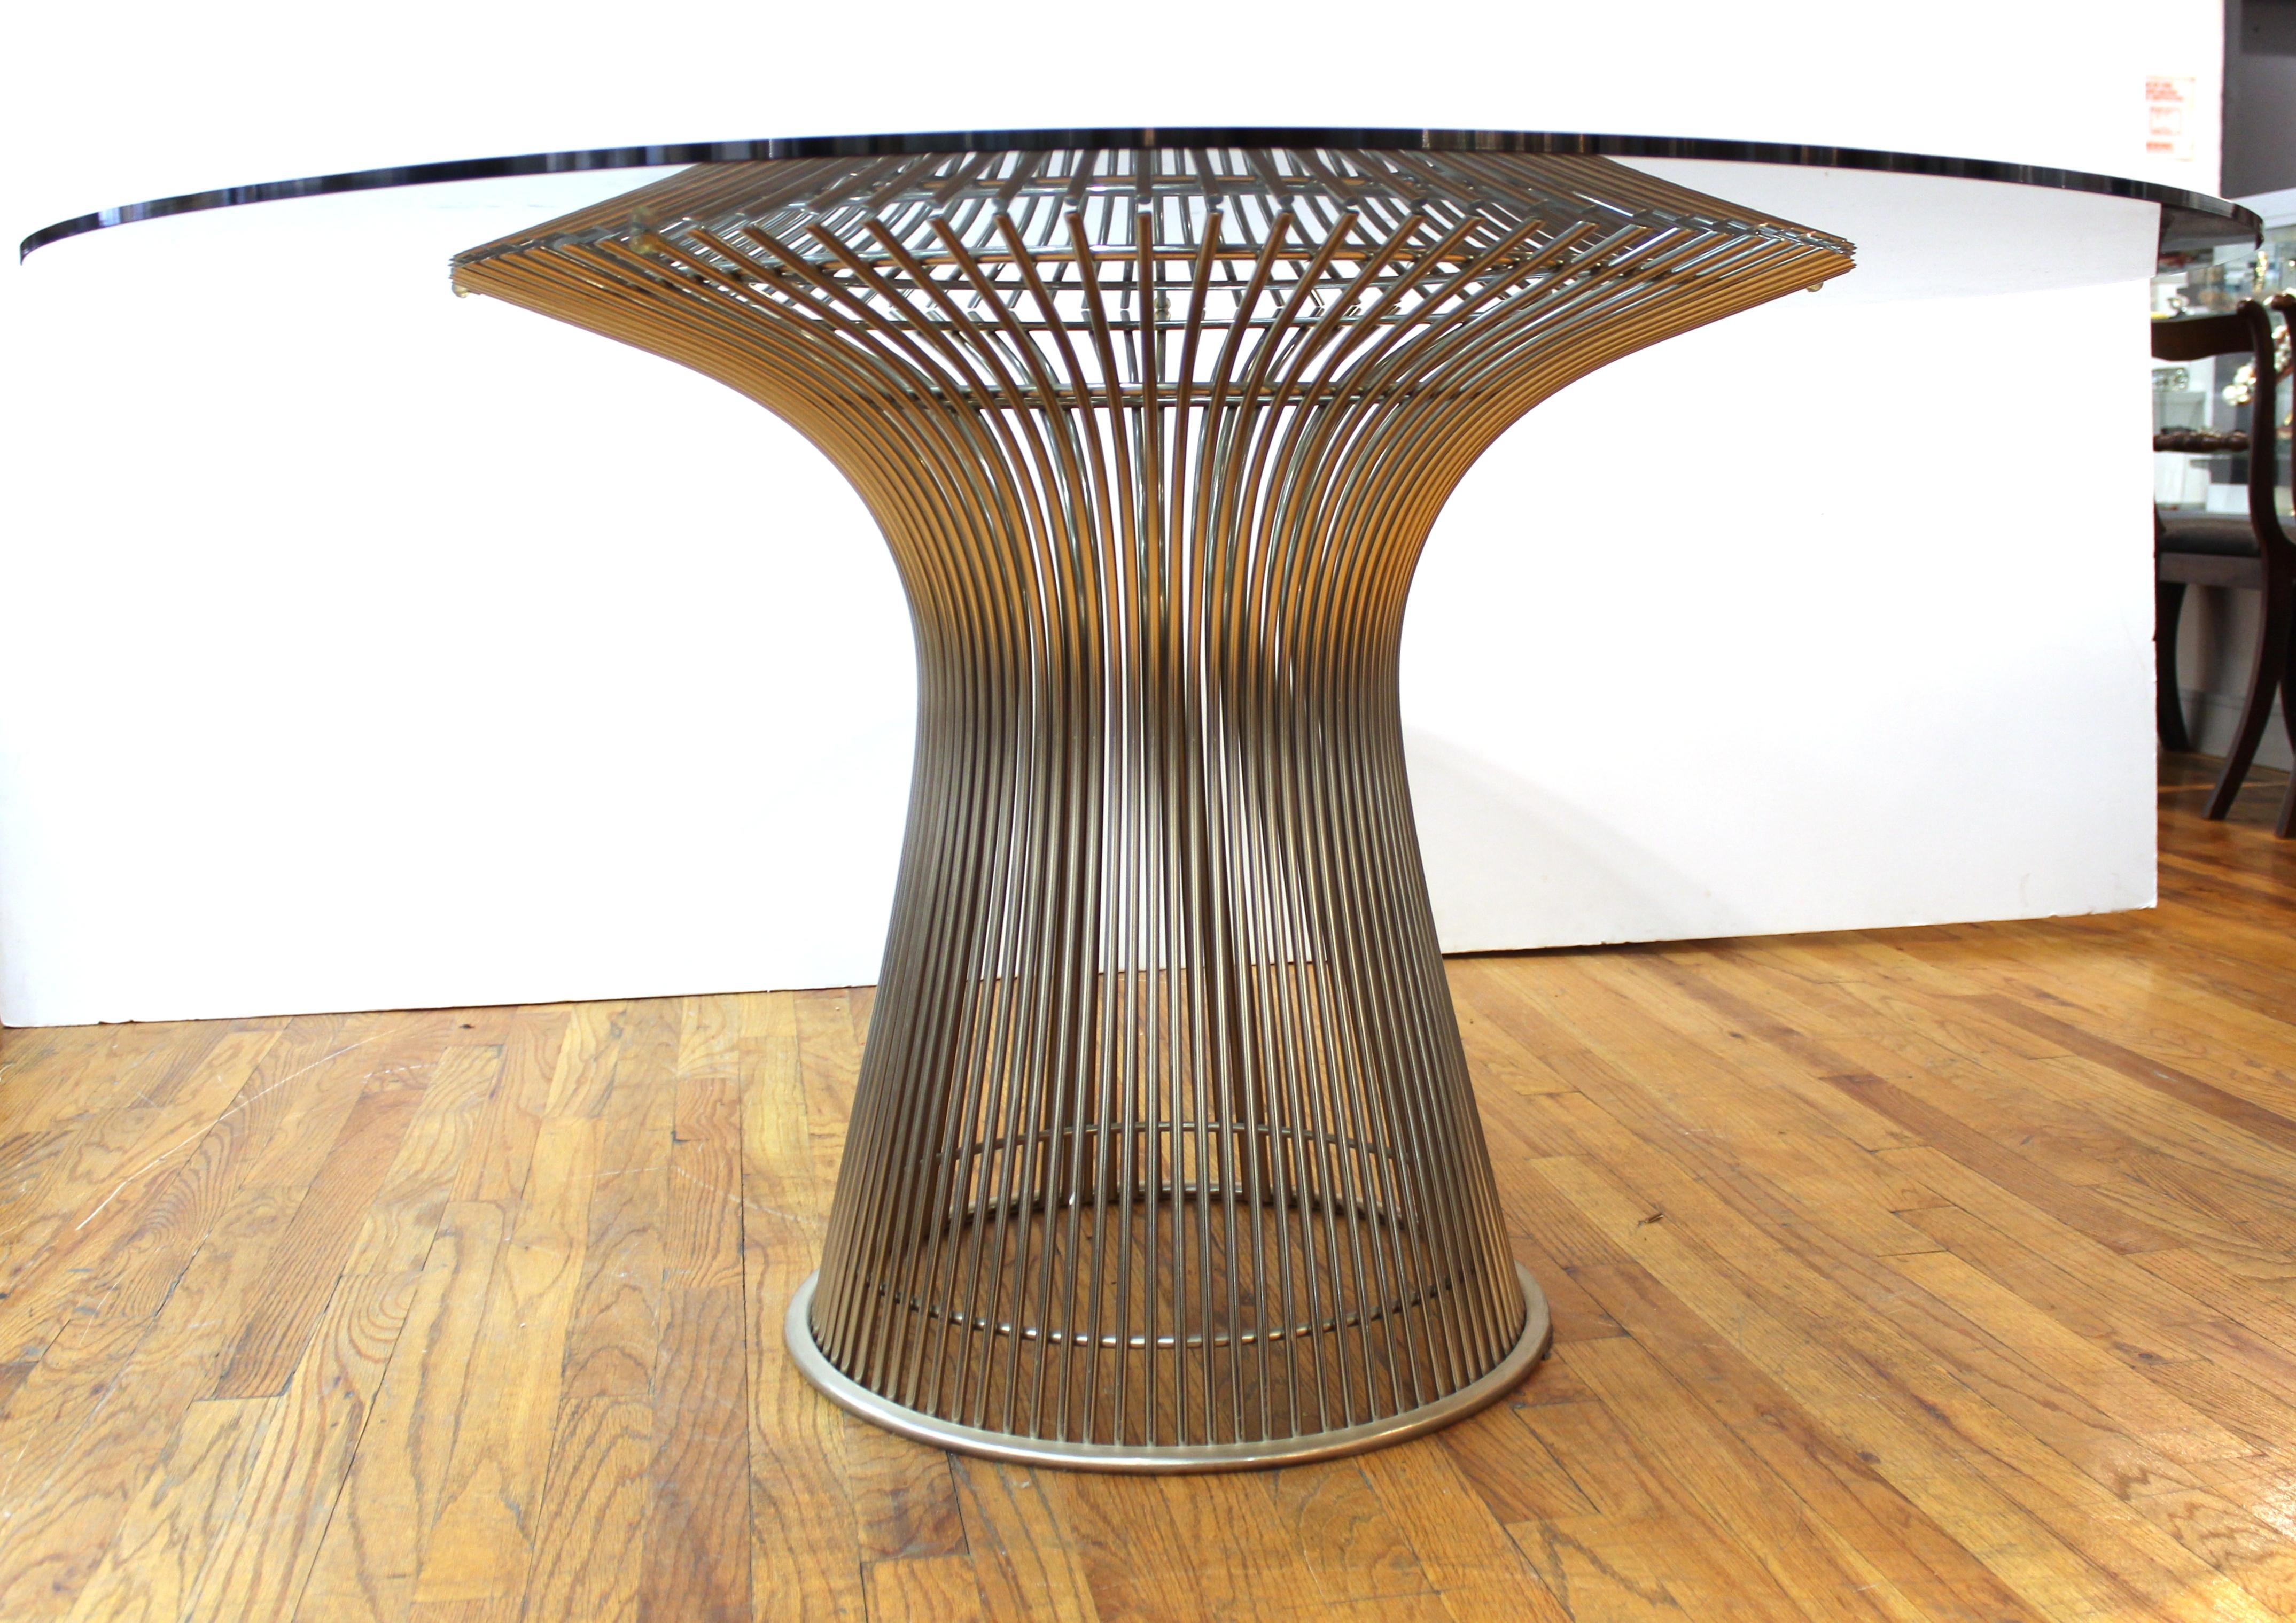 Late 20th Century Warren Platner for Knoll Mid-Century Modern Dining Table & Chairs